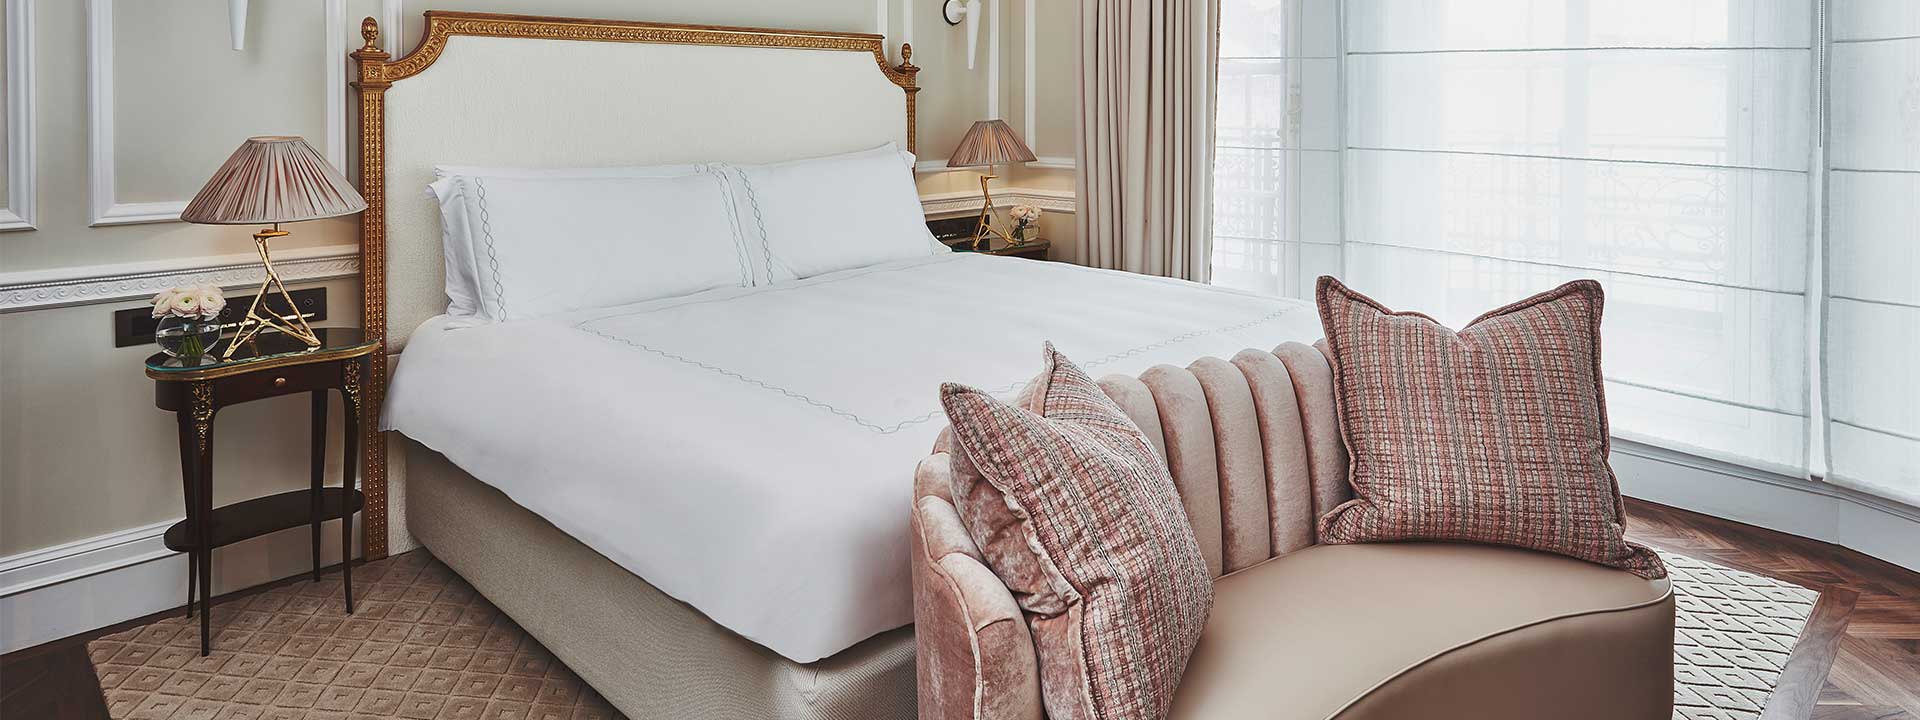 A view of the King Bed in the Mayfair Terrace Suite, surrounded by lavish details in the bedroom interior.